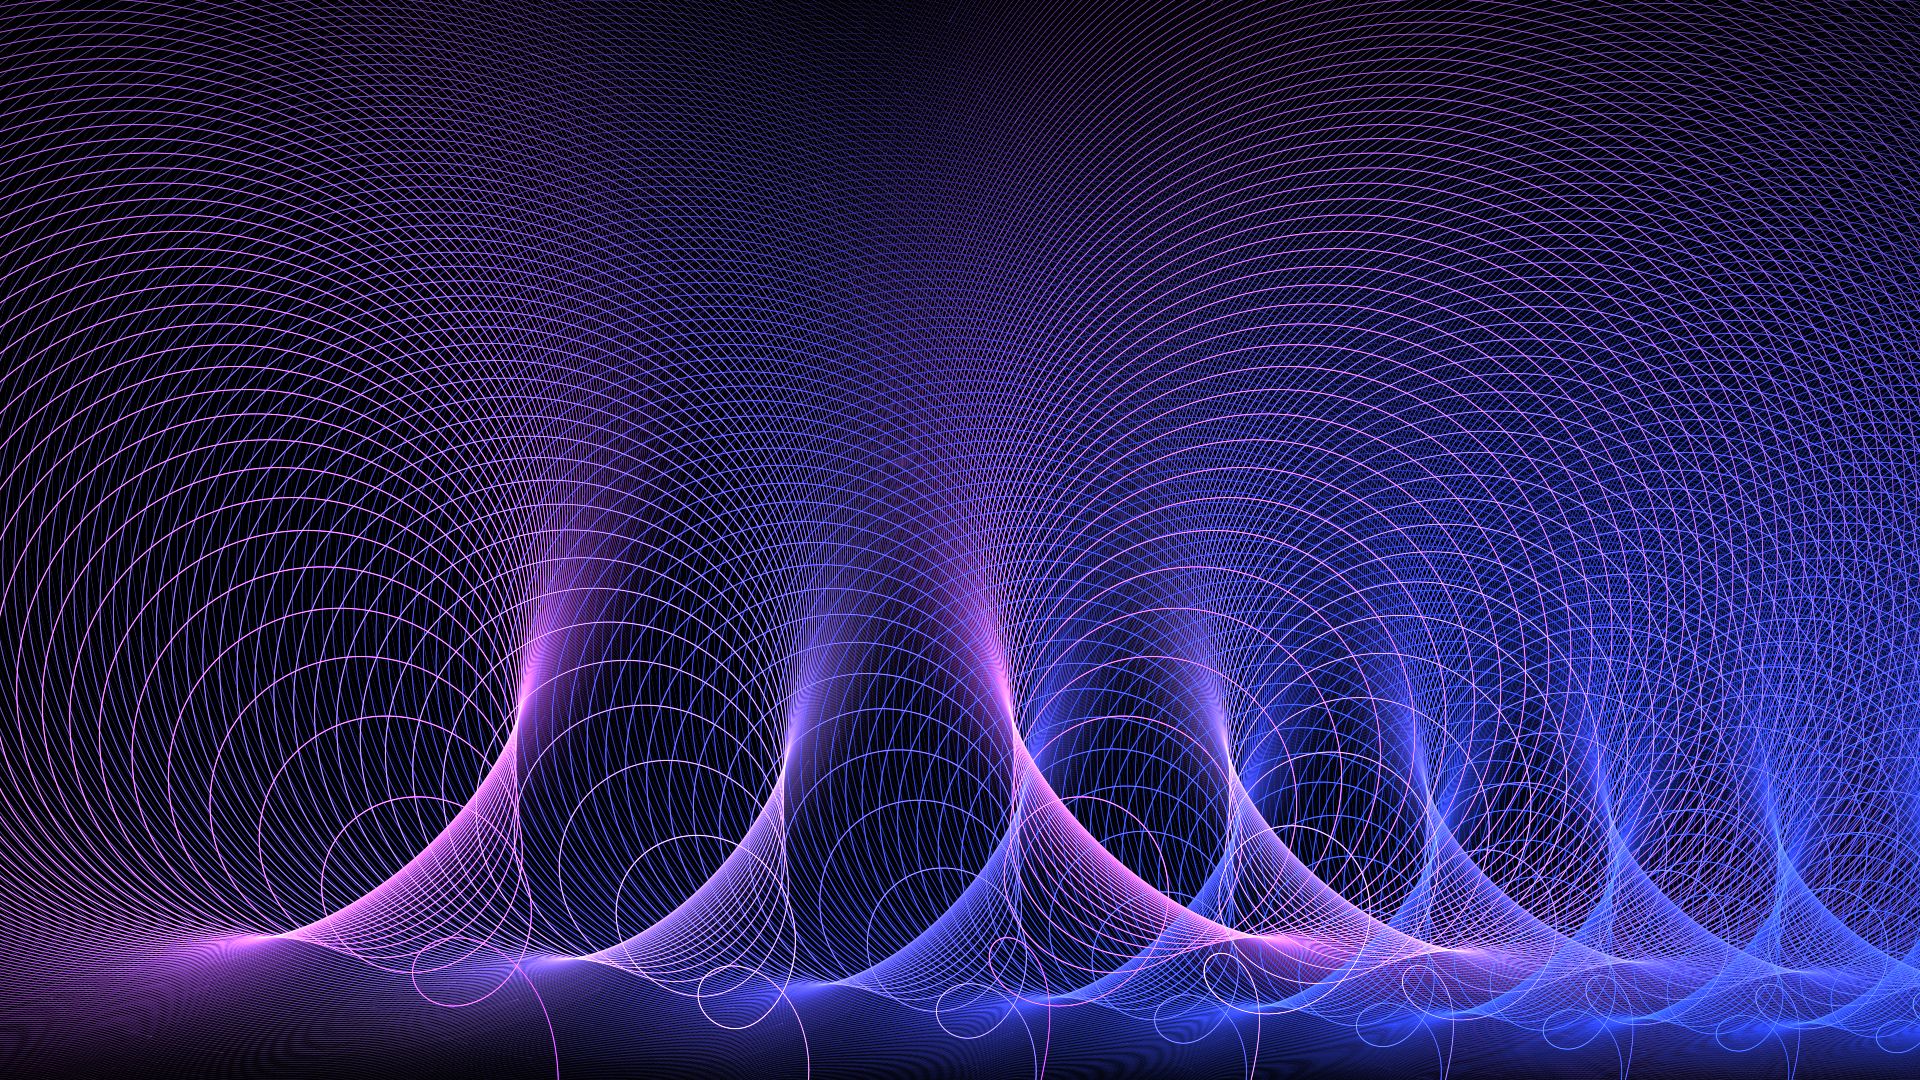 energy, science, purple, abstract, fractal, wave wallpaper for mobile